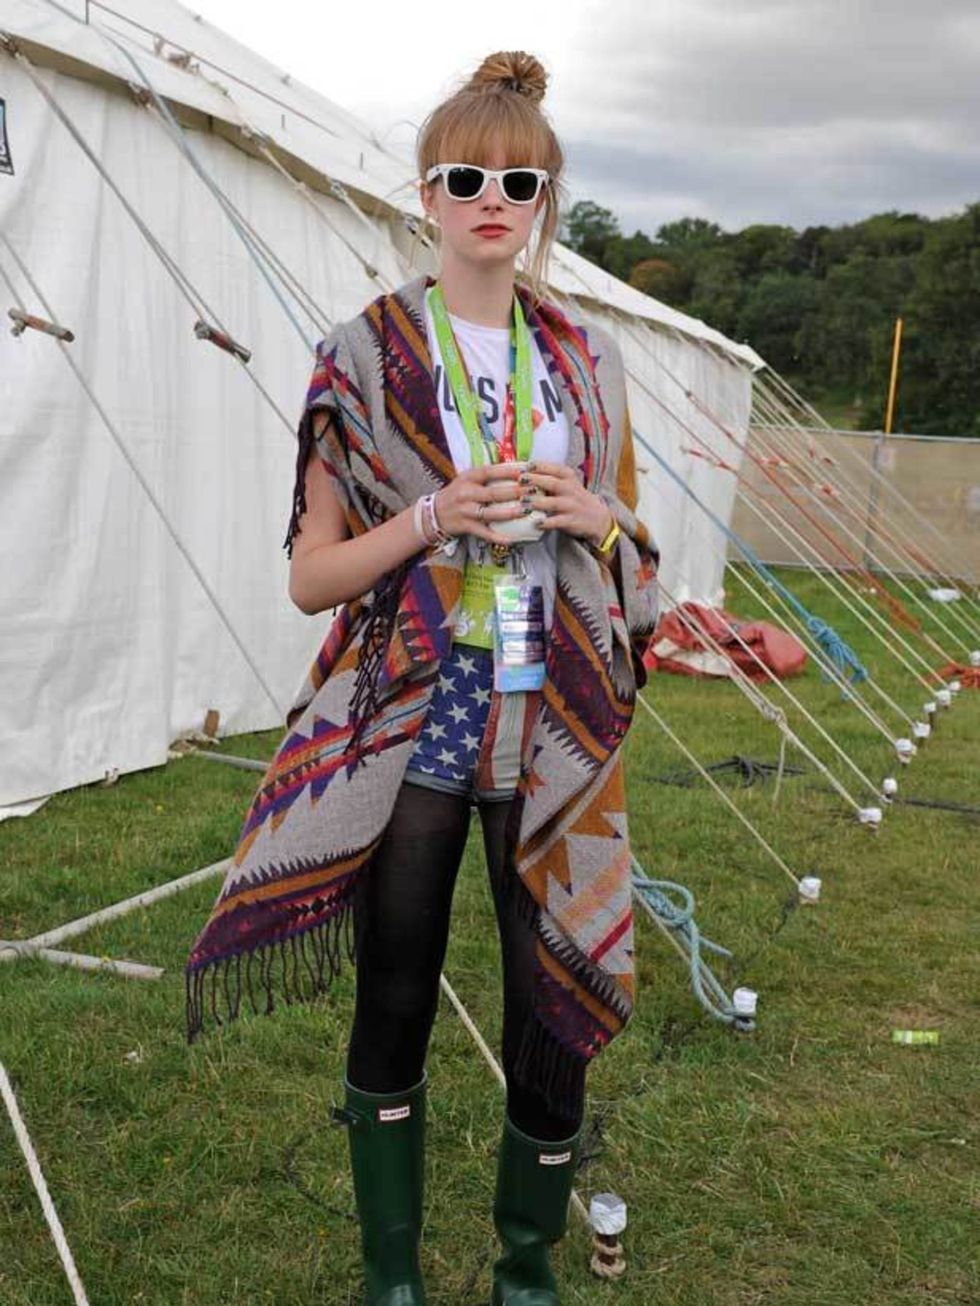 <p>Photo by Alistair Guy.Sophie, 18, Student. H&amp;M poncho, Topshop t-shirt and shorts, Vivienne Westwood jewellery, Hunter wellies.</p>